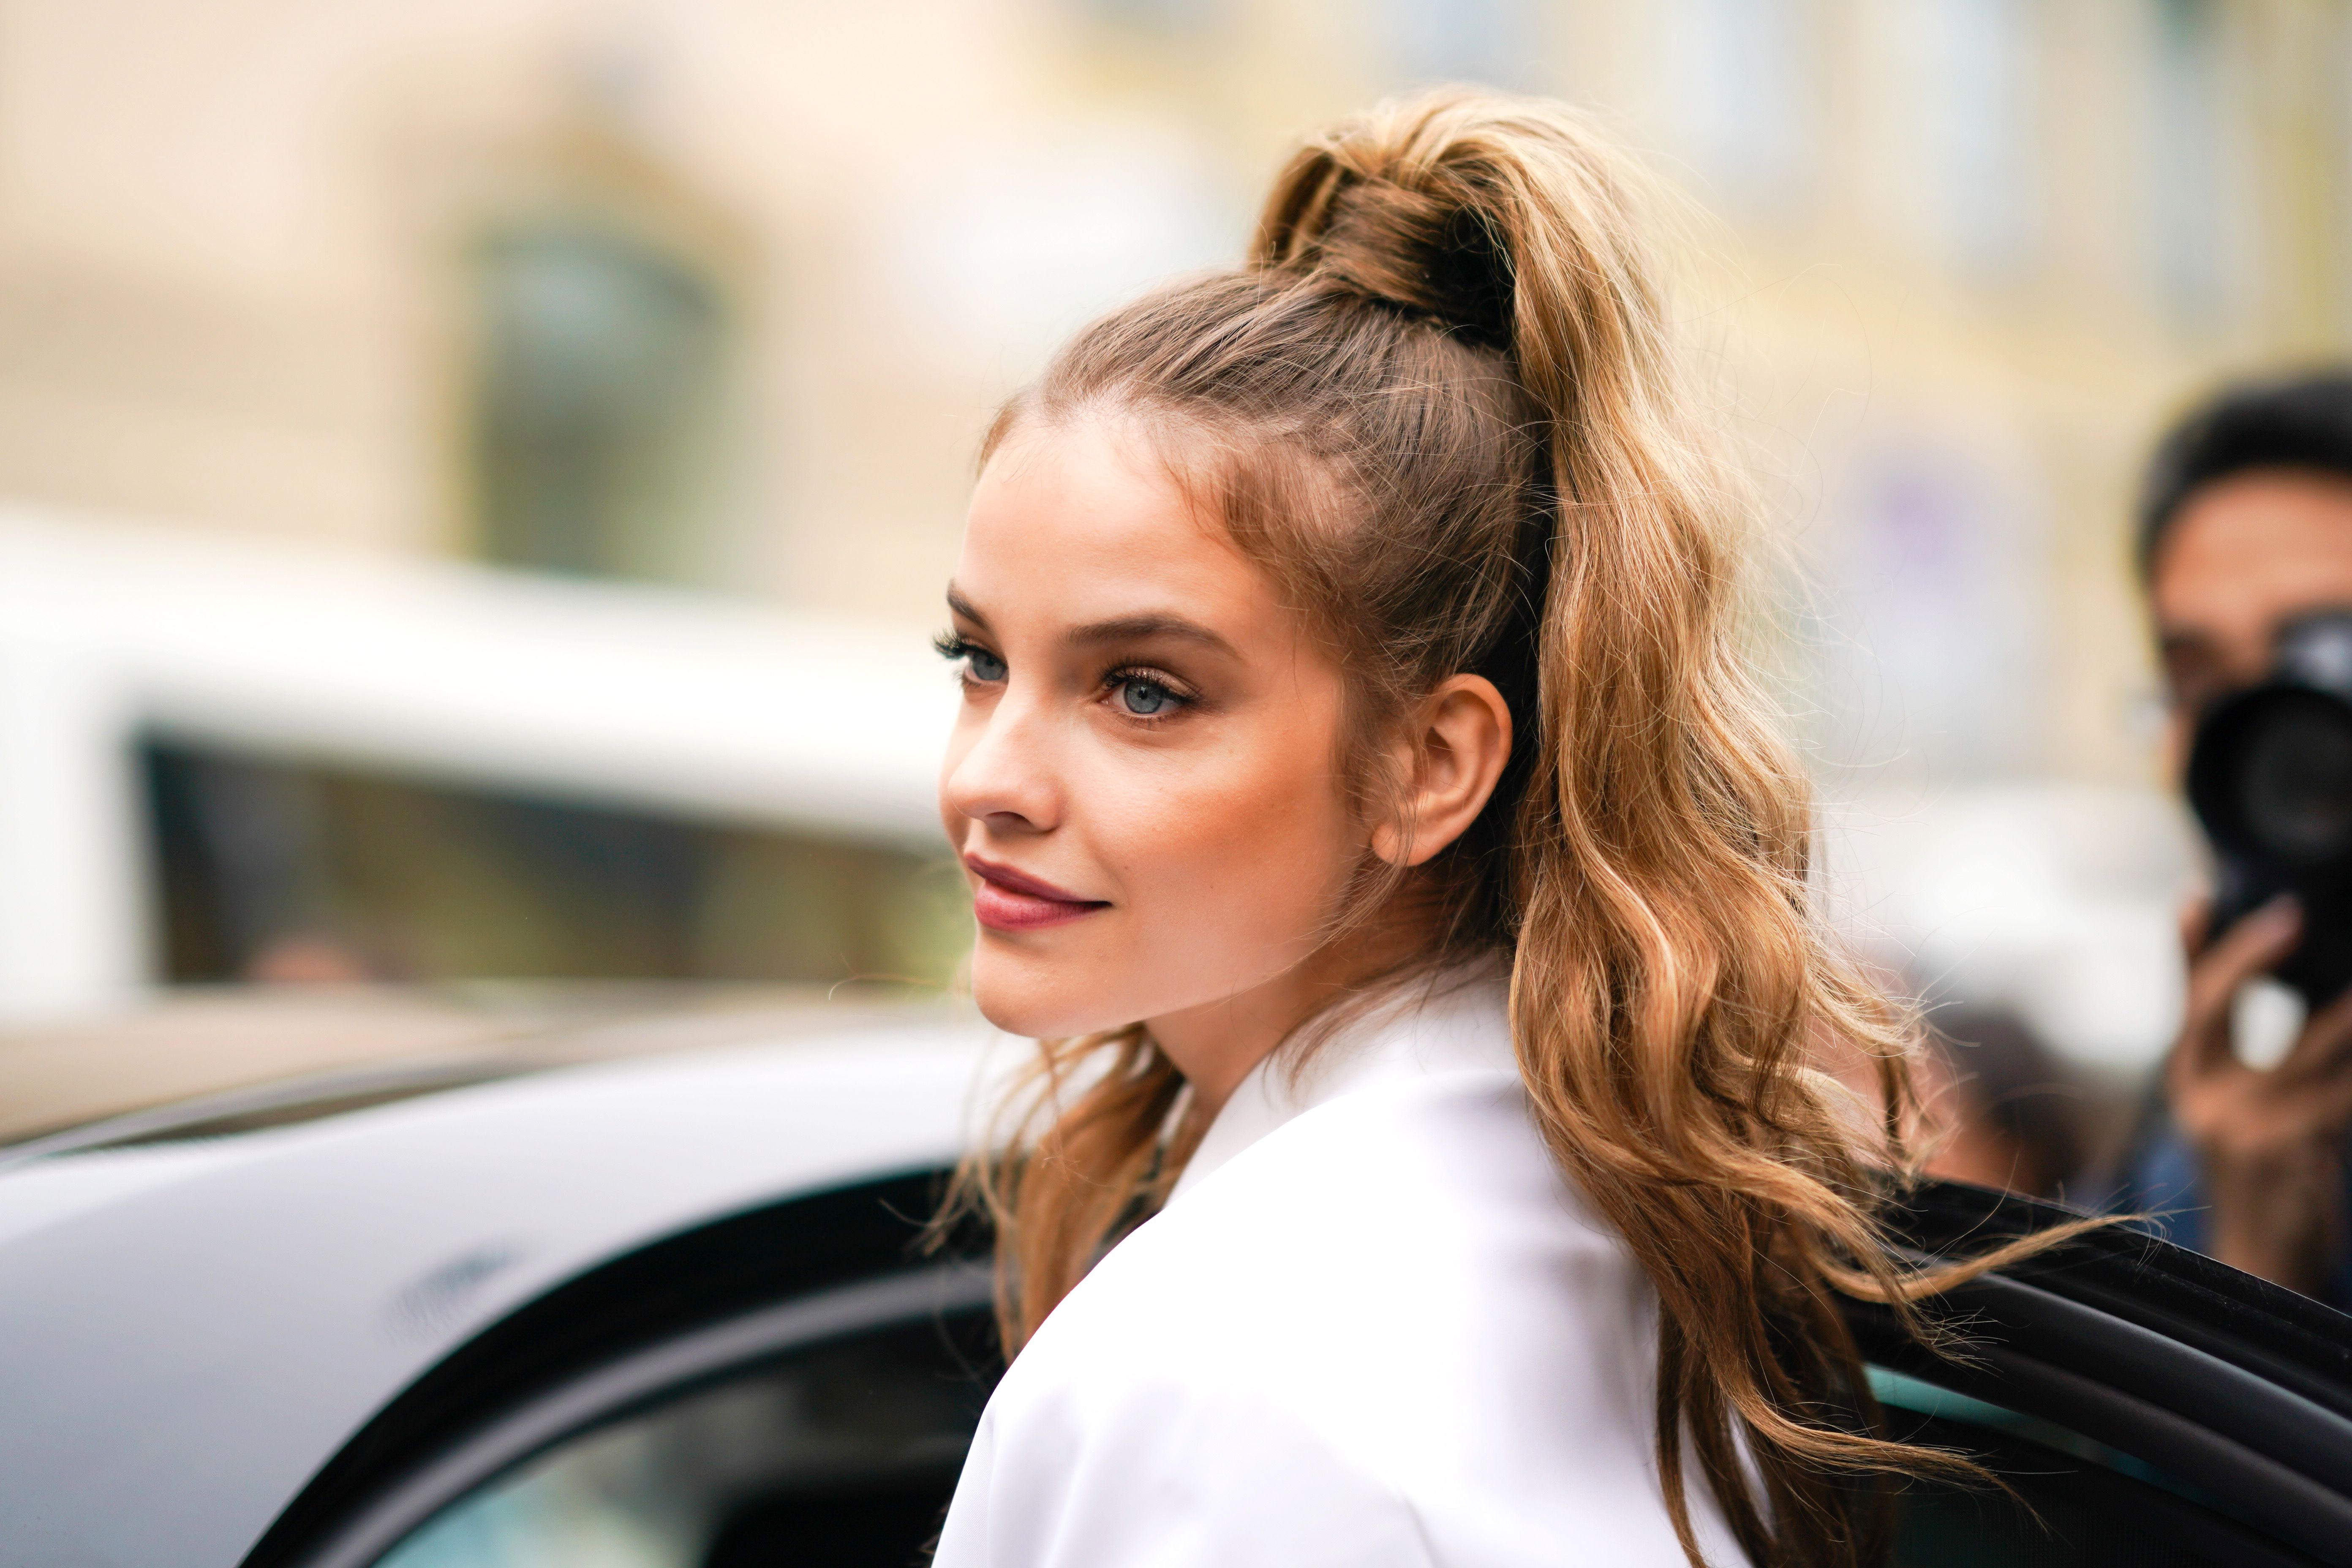 5 New Winter Haircuts to Try for 2019 - Winter's Best Hairstyle Trends